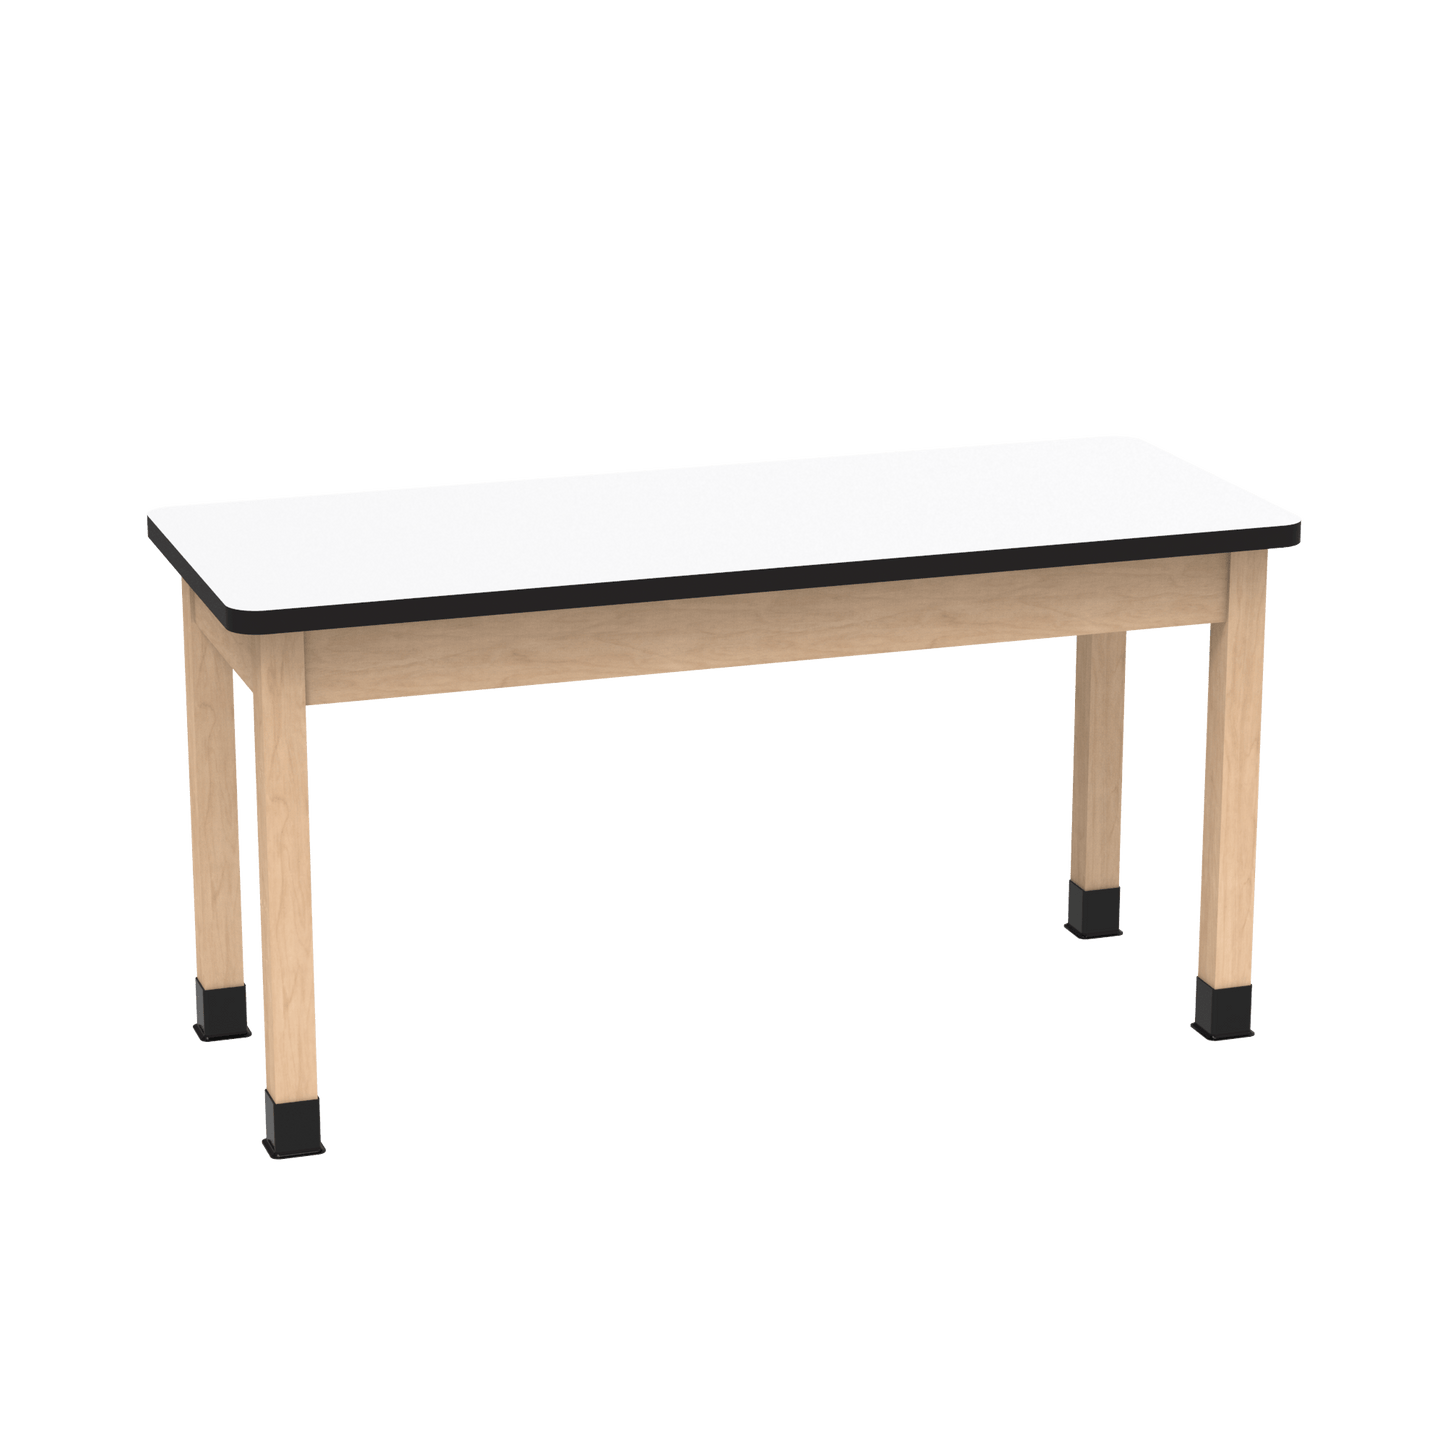 Diversified Woodcrafts Science Table - Plain Apron - 60" W x 36" D - Solid Wood Frame and Adjustable Glides - SchoolOutlet